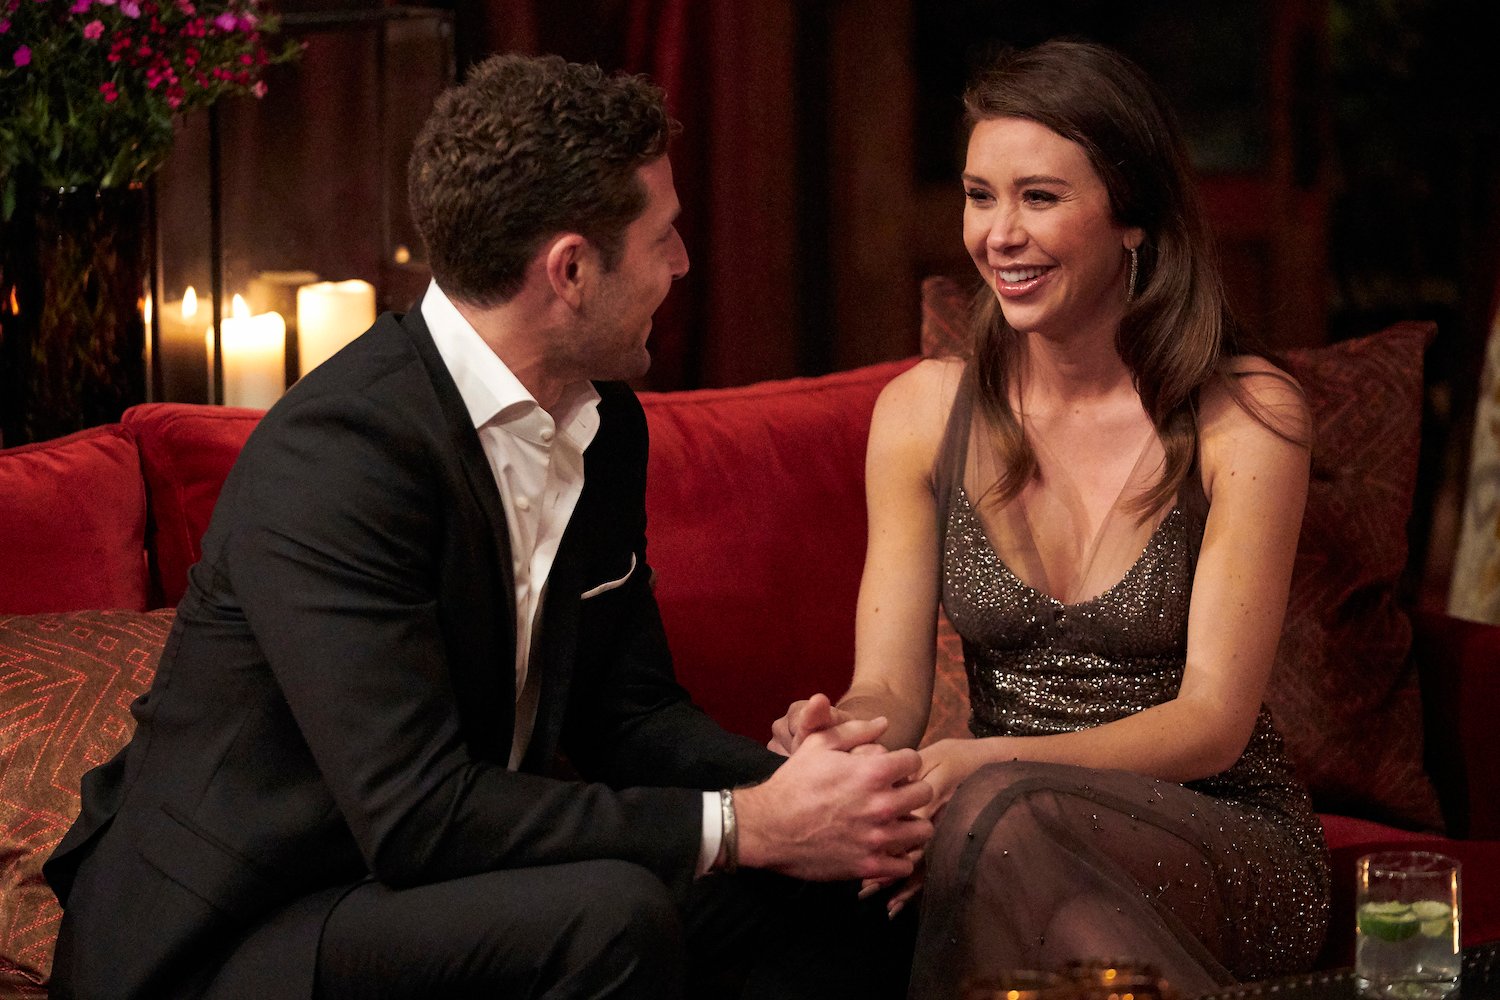 'The Bachelorette' Spoilers Hometowns Hint at Jason and Johnny's End